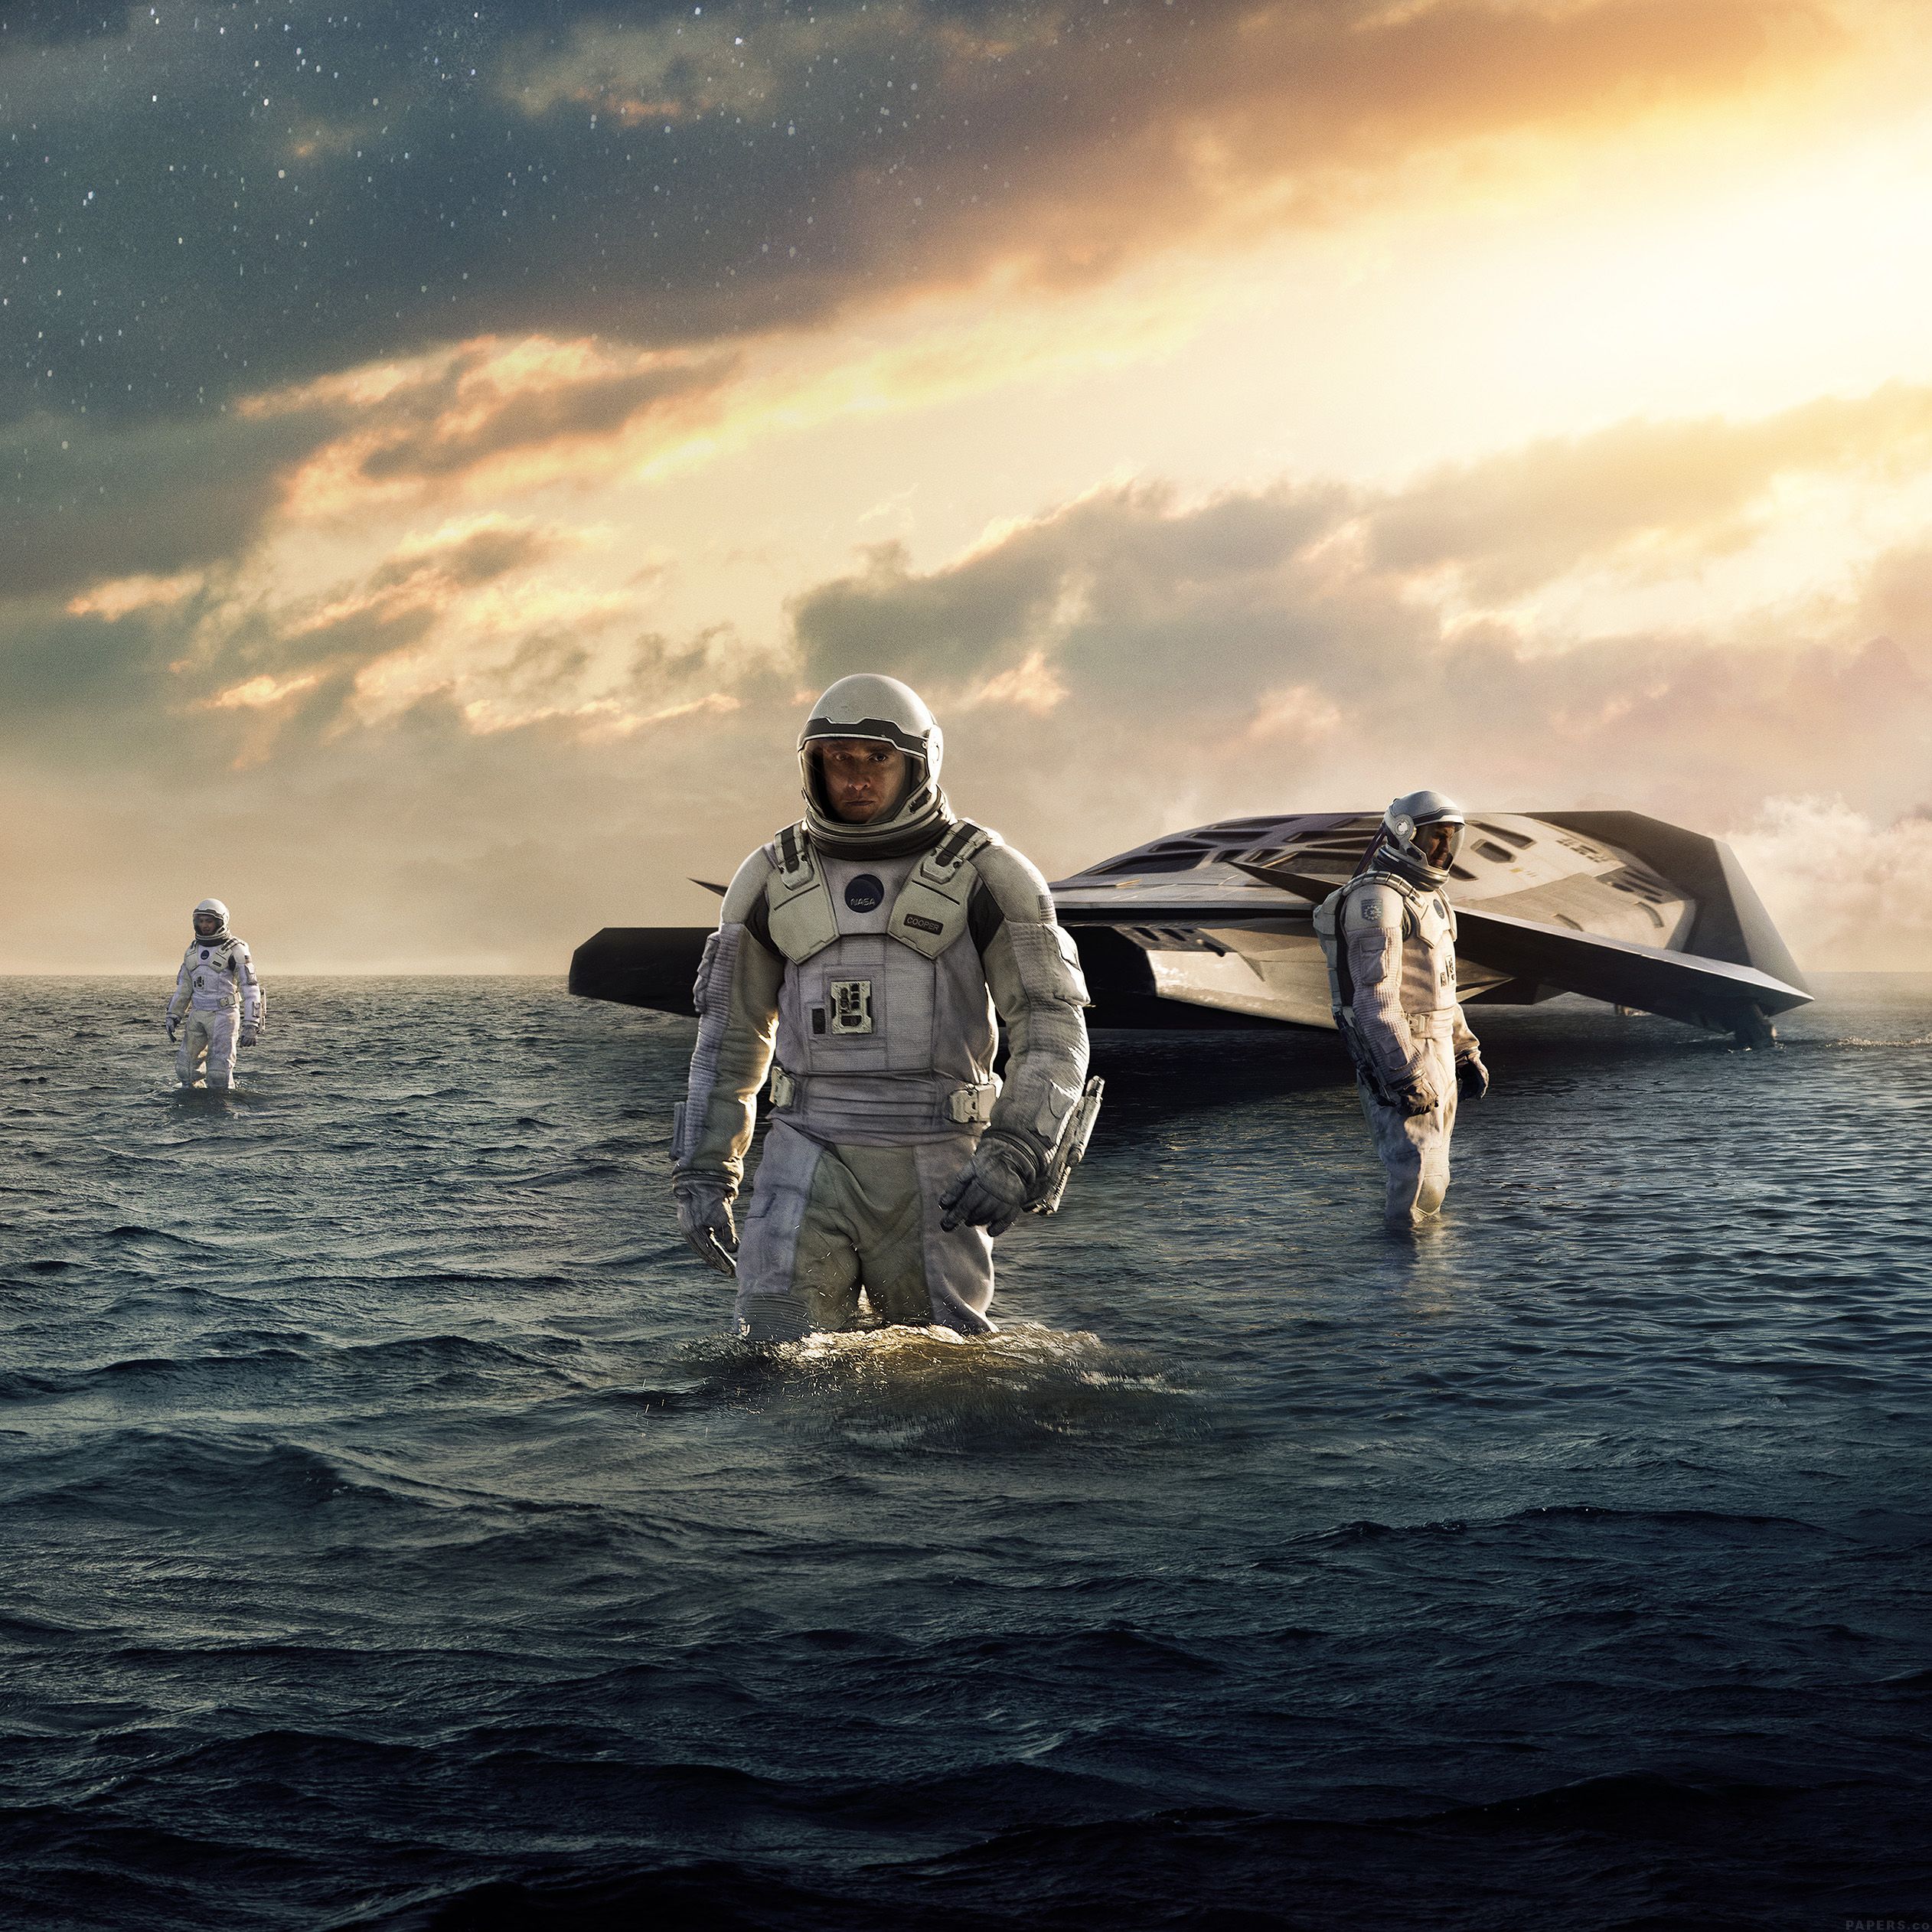 Interstellar wallpaper for iPhone and iPad